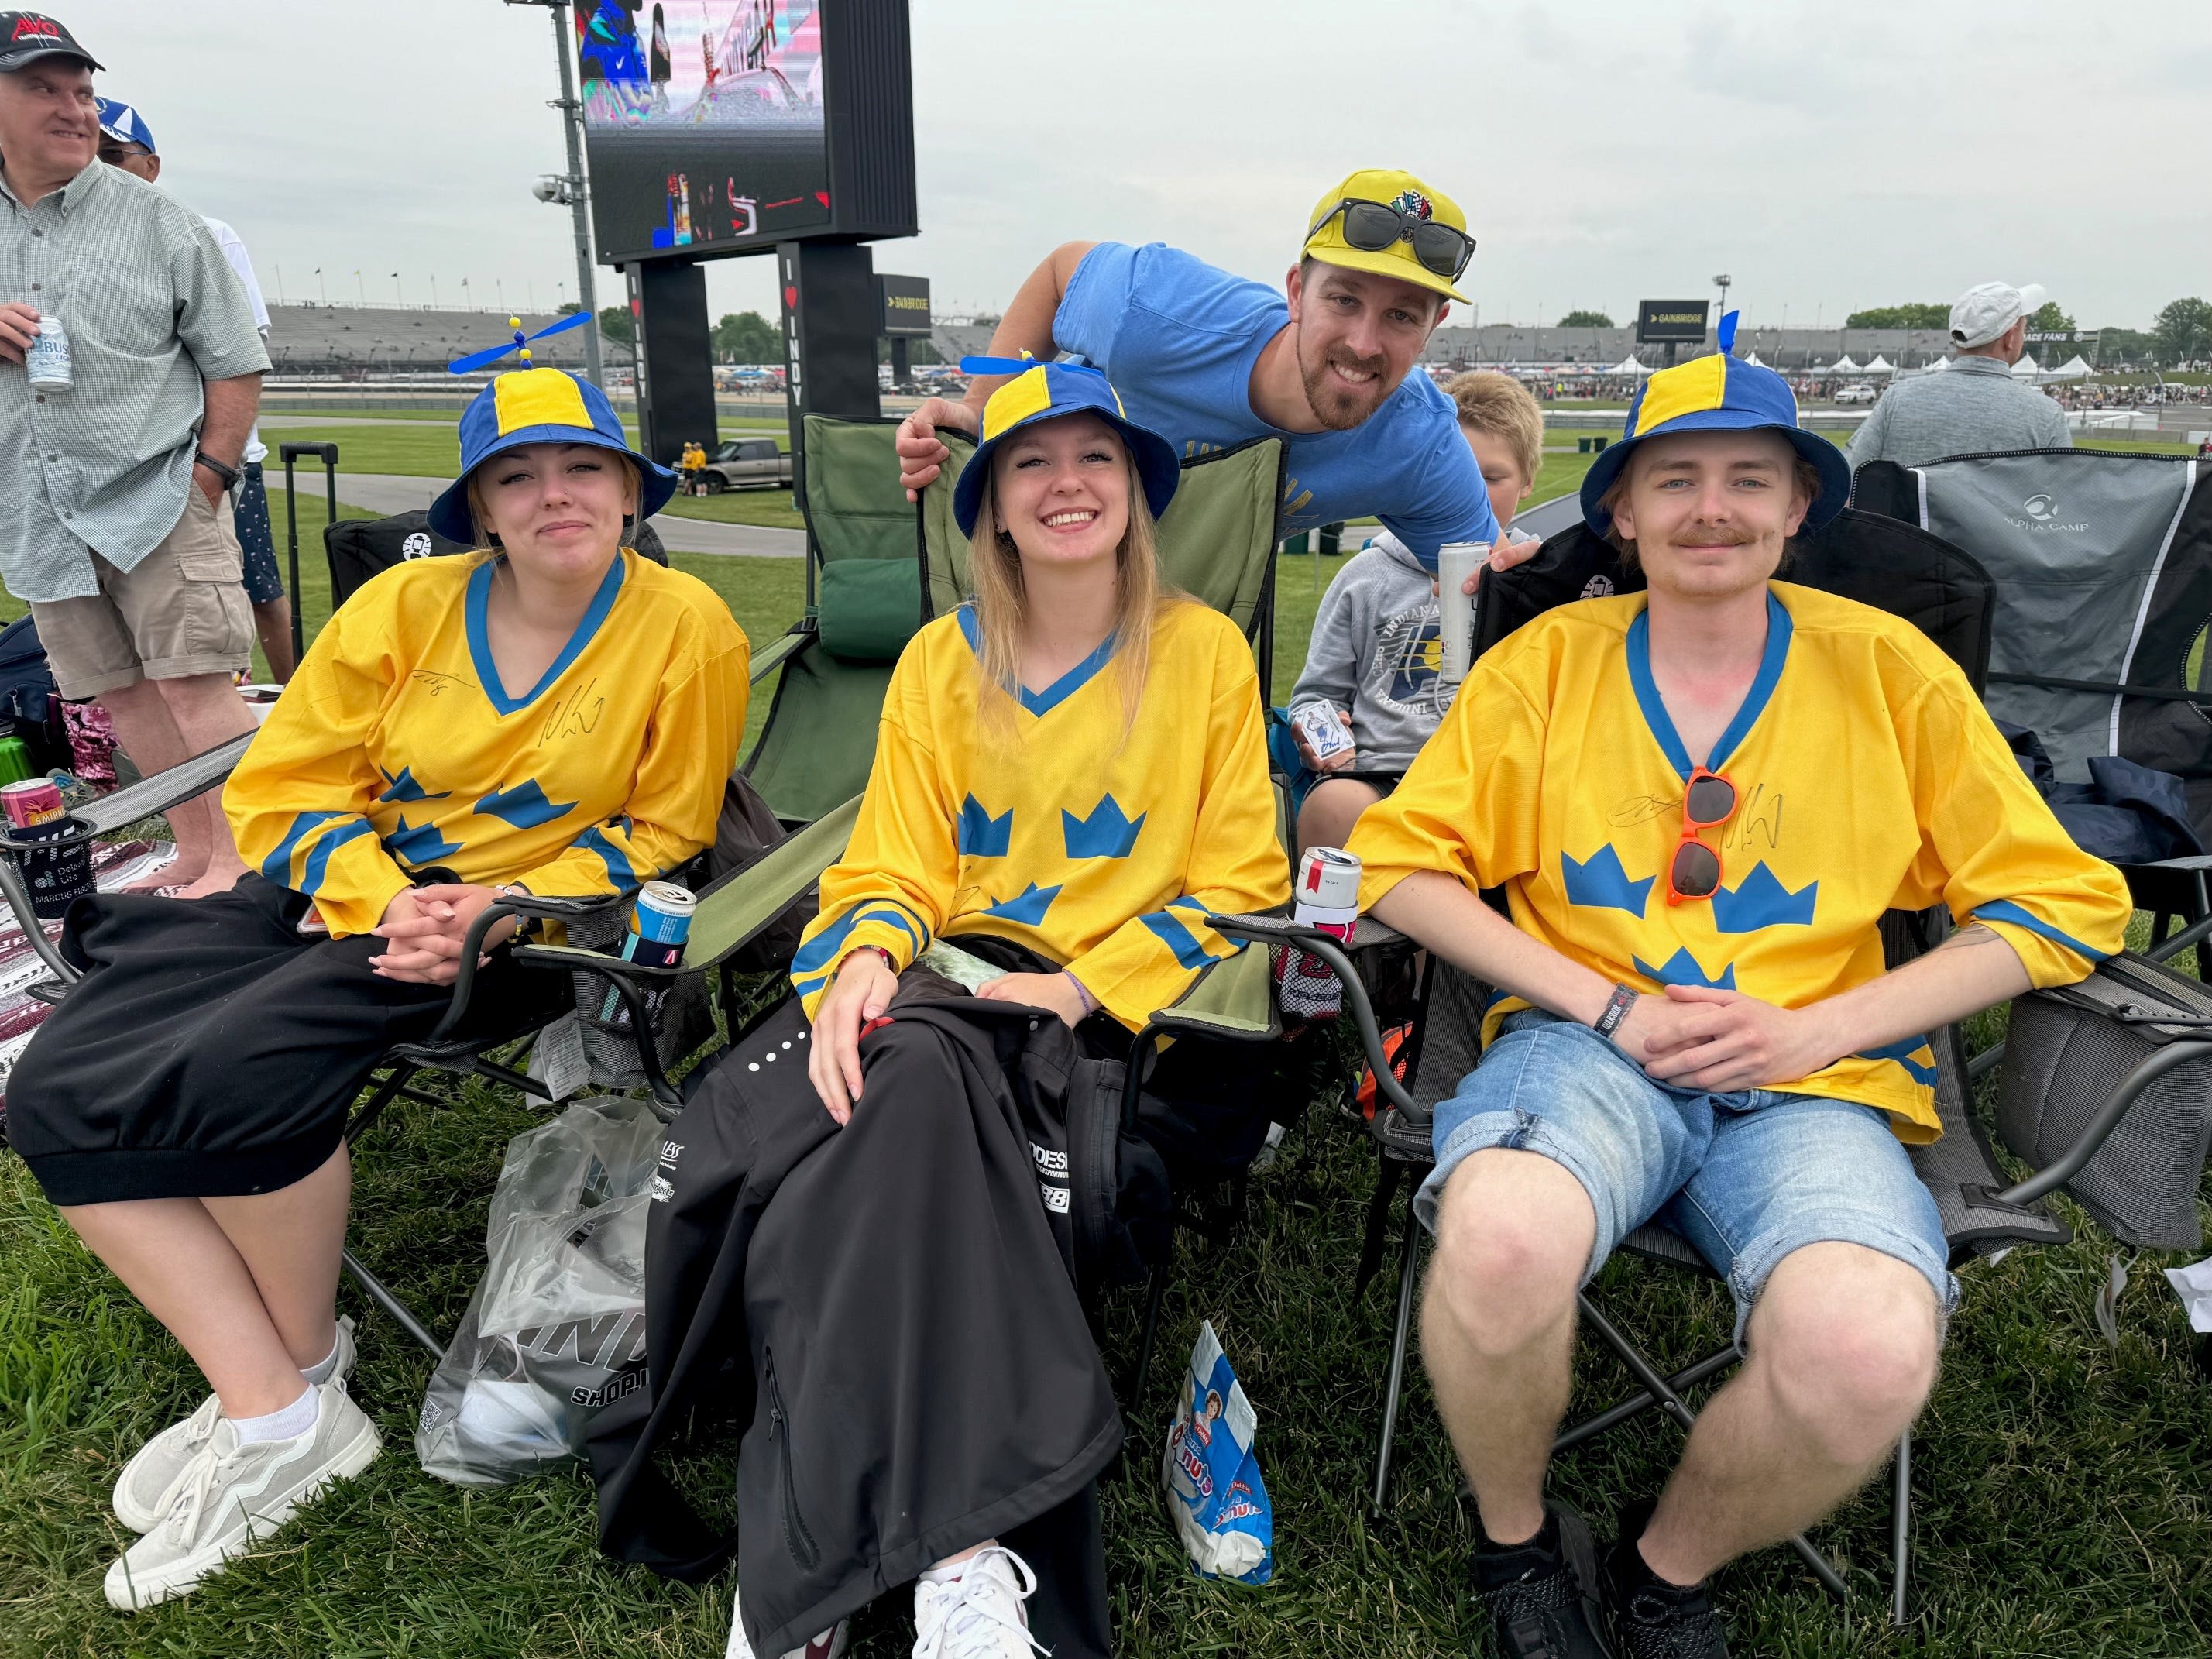 Live Indy 500 fun report: Fans asked to leave stands, Snake Pit as storm looms